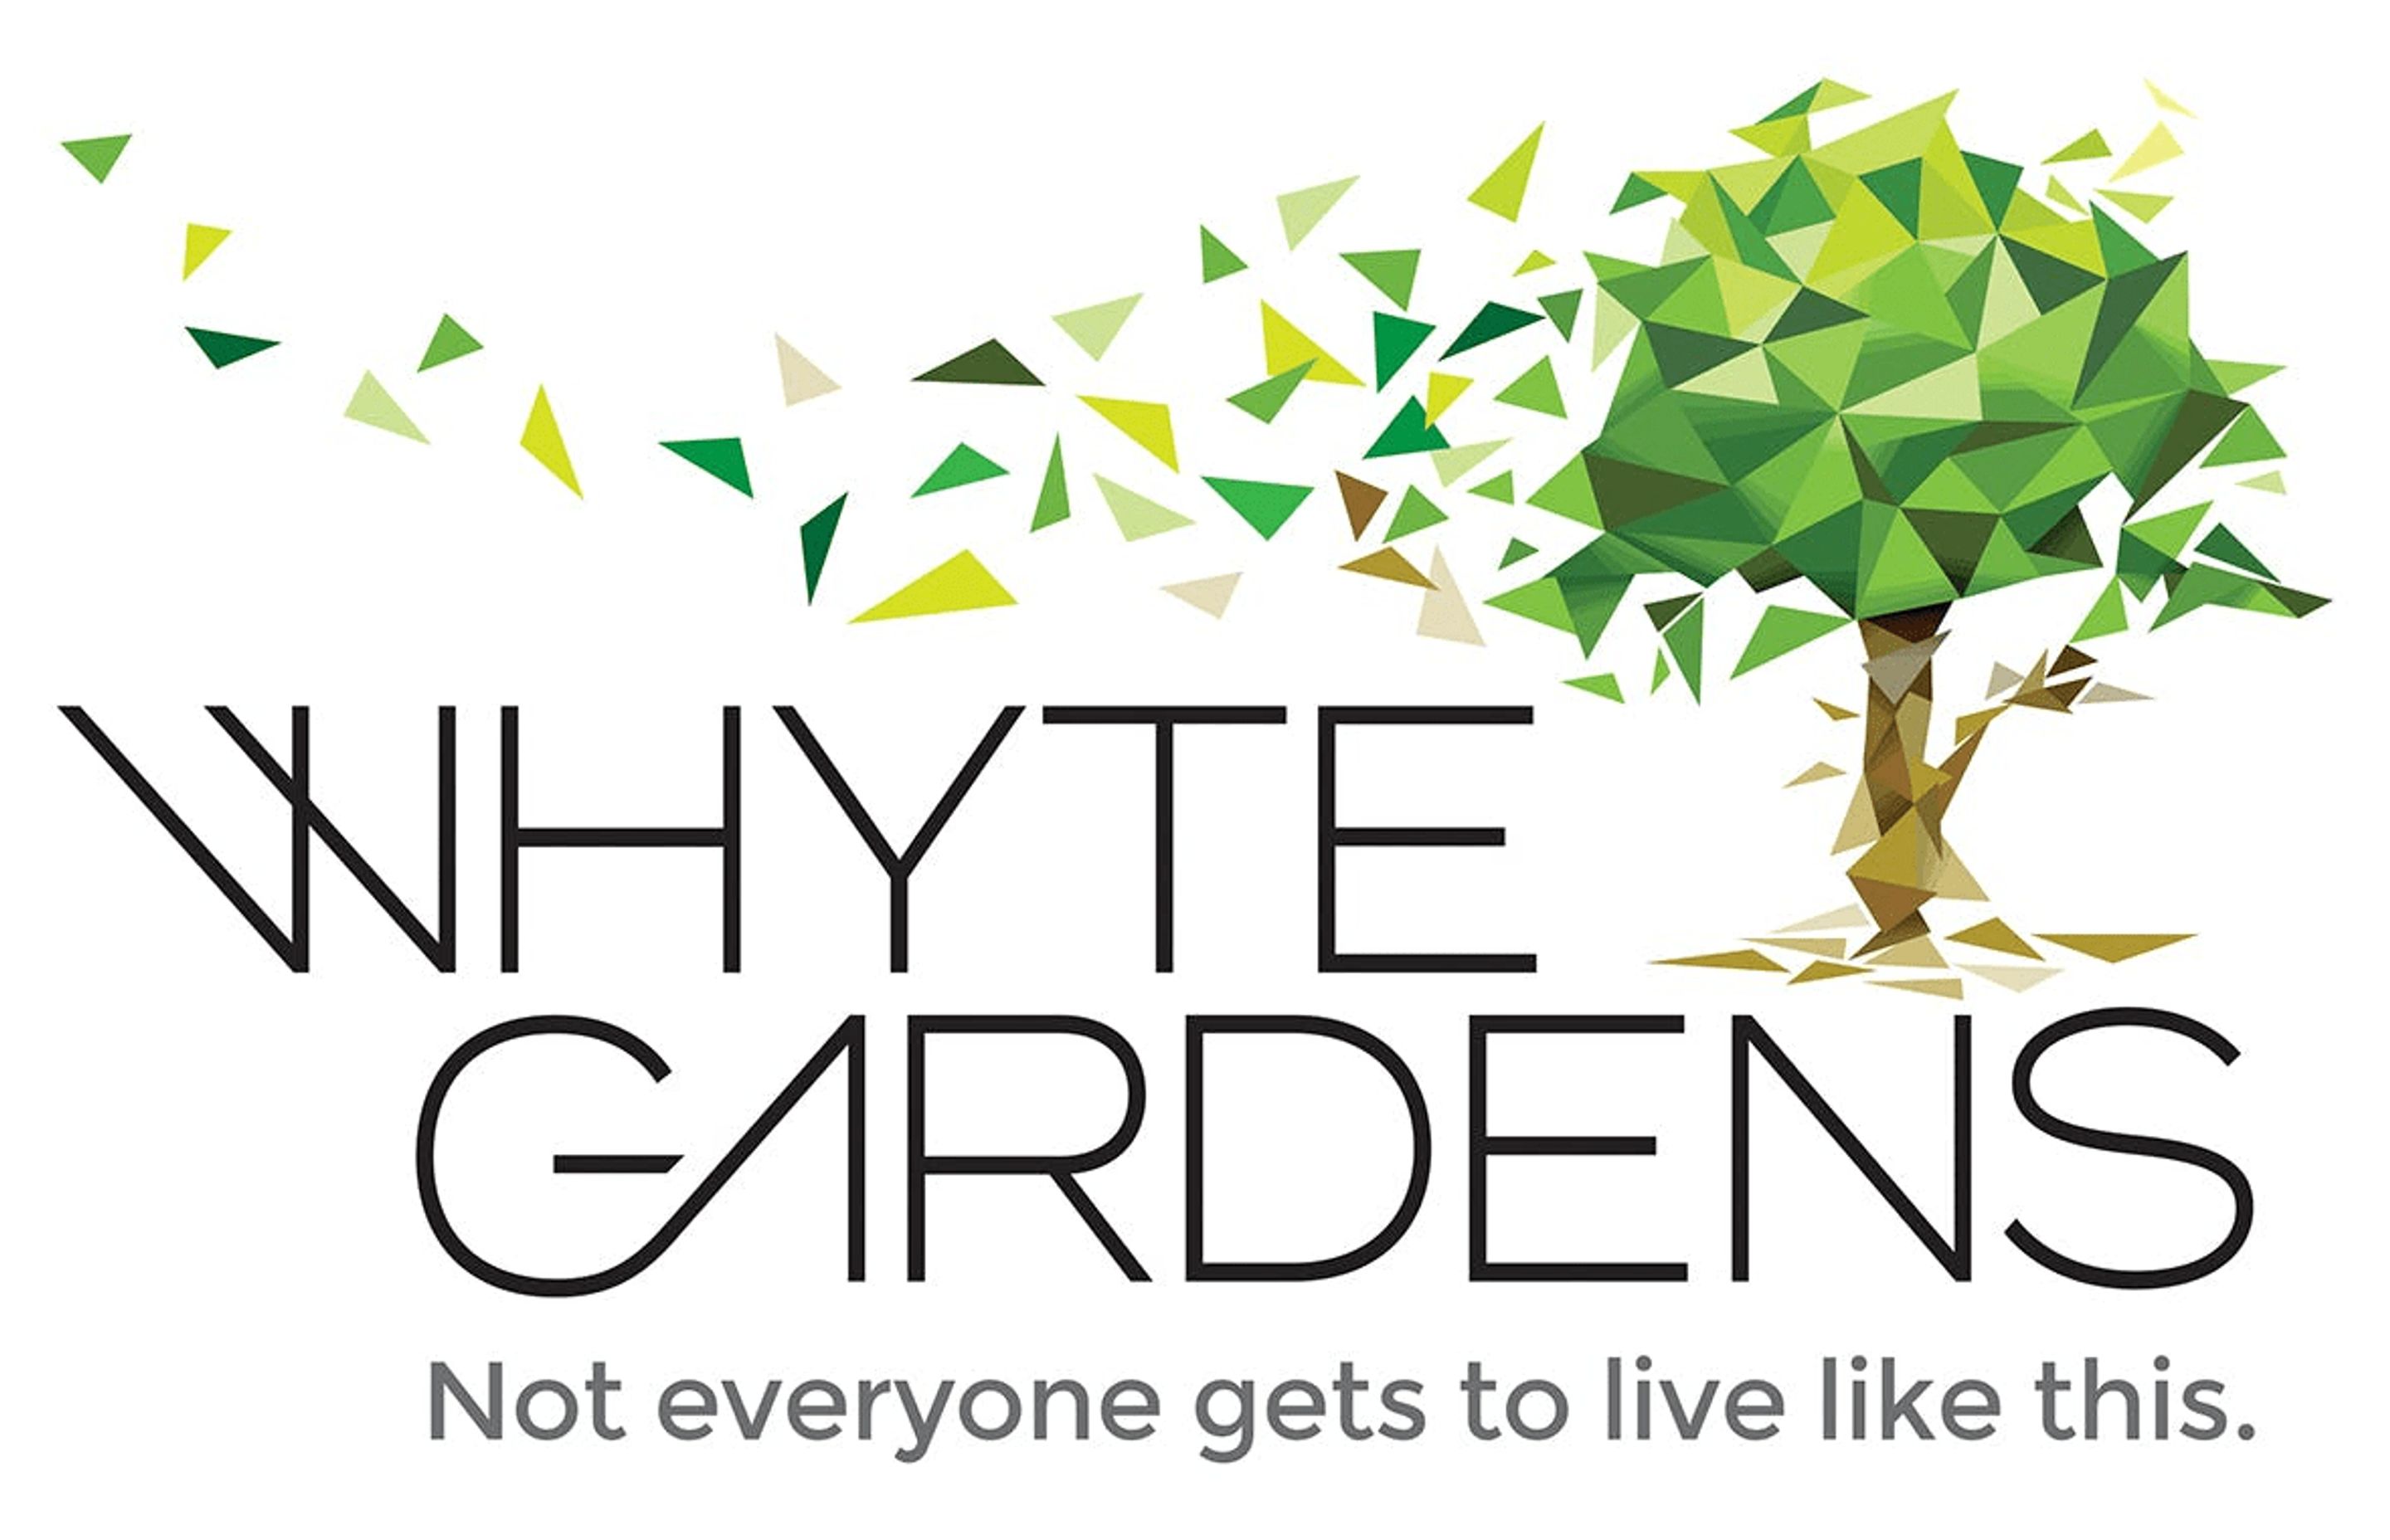 The Alliances that help Whyte Gardens create sophisticated gardens